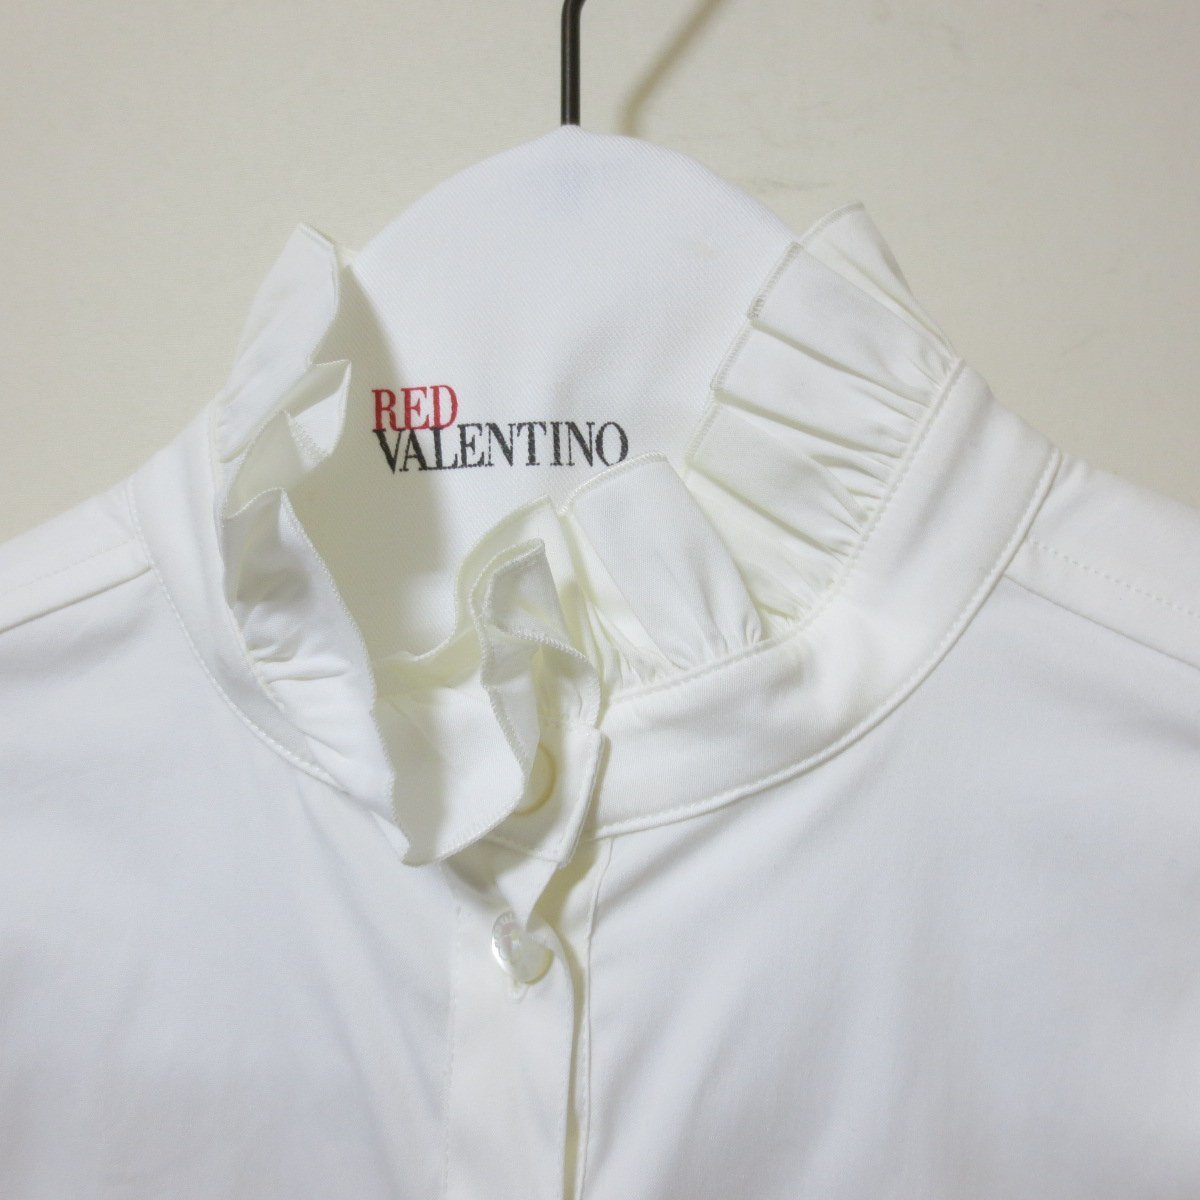 T551 new goods RED VALENTINO eggshell white blouse short sleeves frill Valentino hanger attached 38